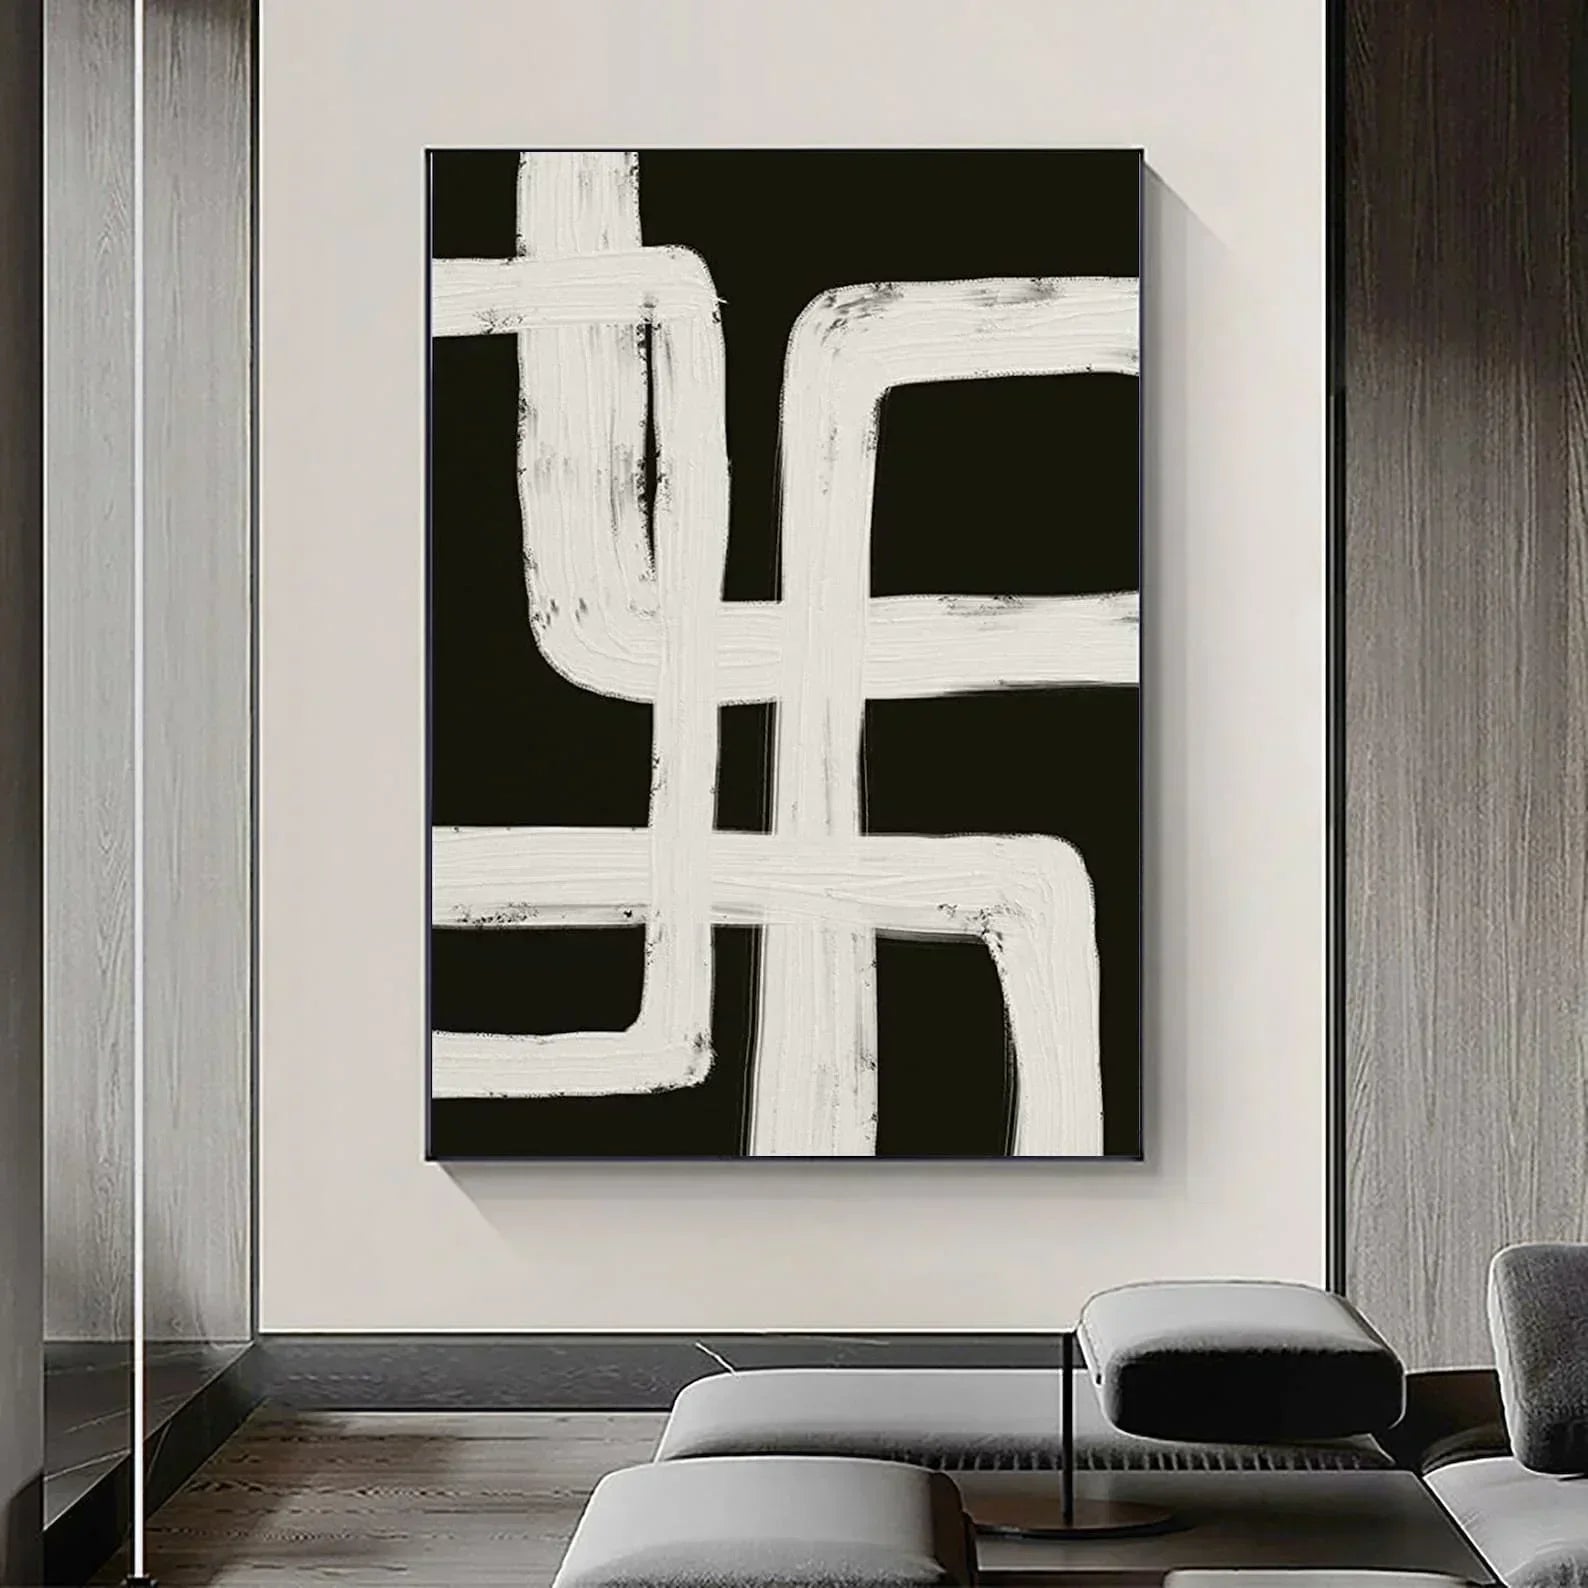 Hand Painted  Black Beige Modern Abstract Art Large Format Canvas Oil Painting For Living Room Entrance Hall Foyer Art Decor - Unique Wall Art Hand Painted On Canvas (Unframed)